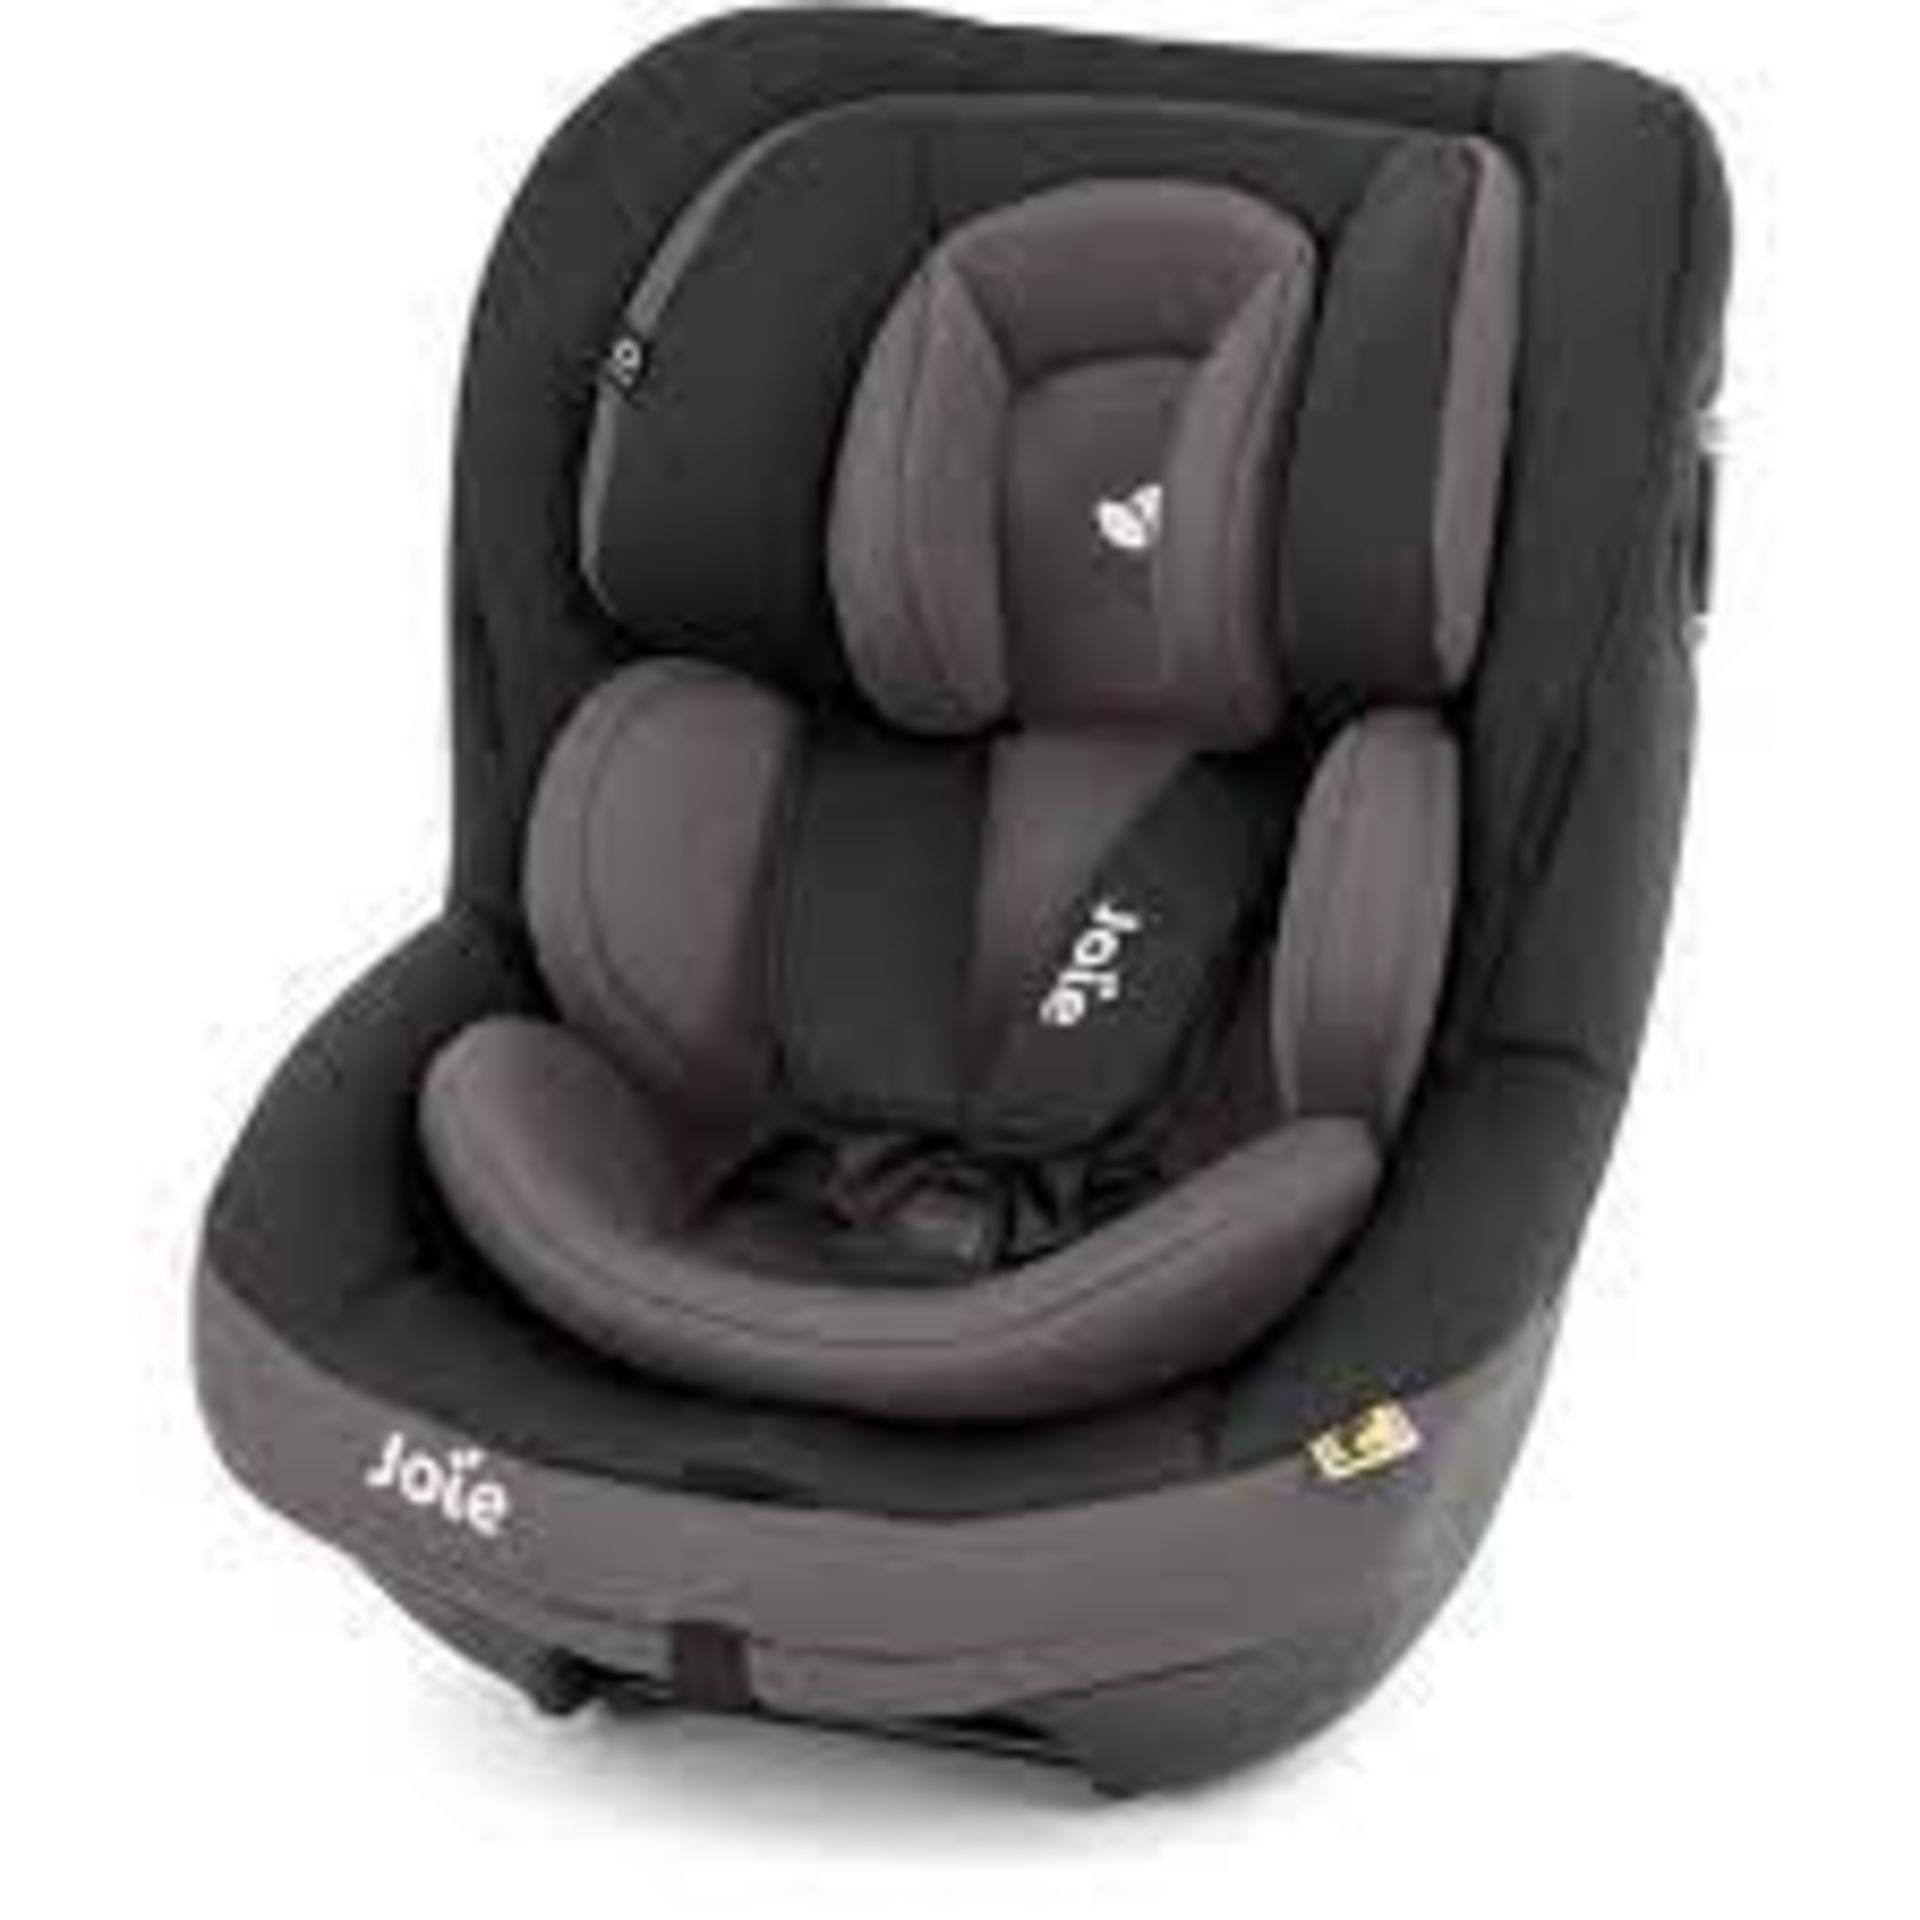 (REF117909) Joie i-Venture i-Size Car Seat RRP £ 337.49